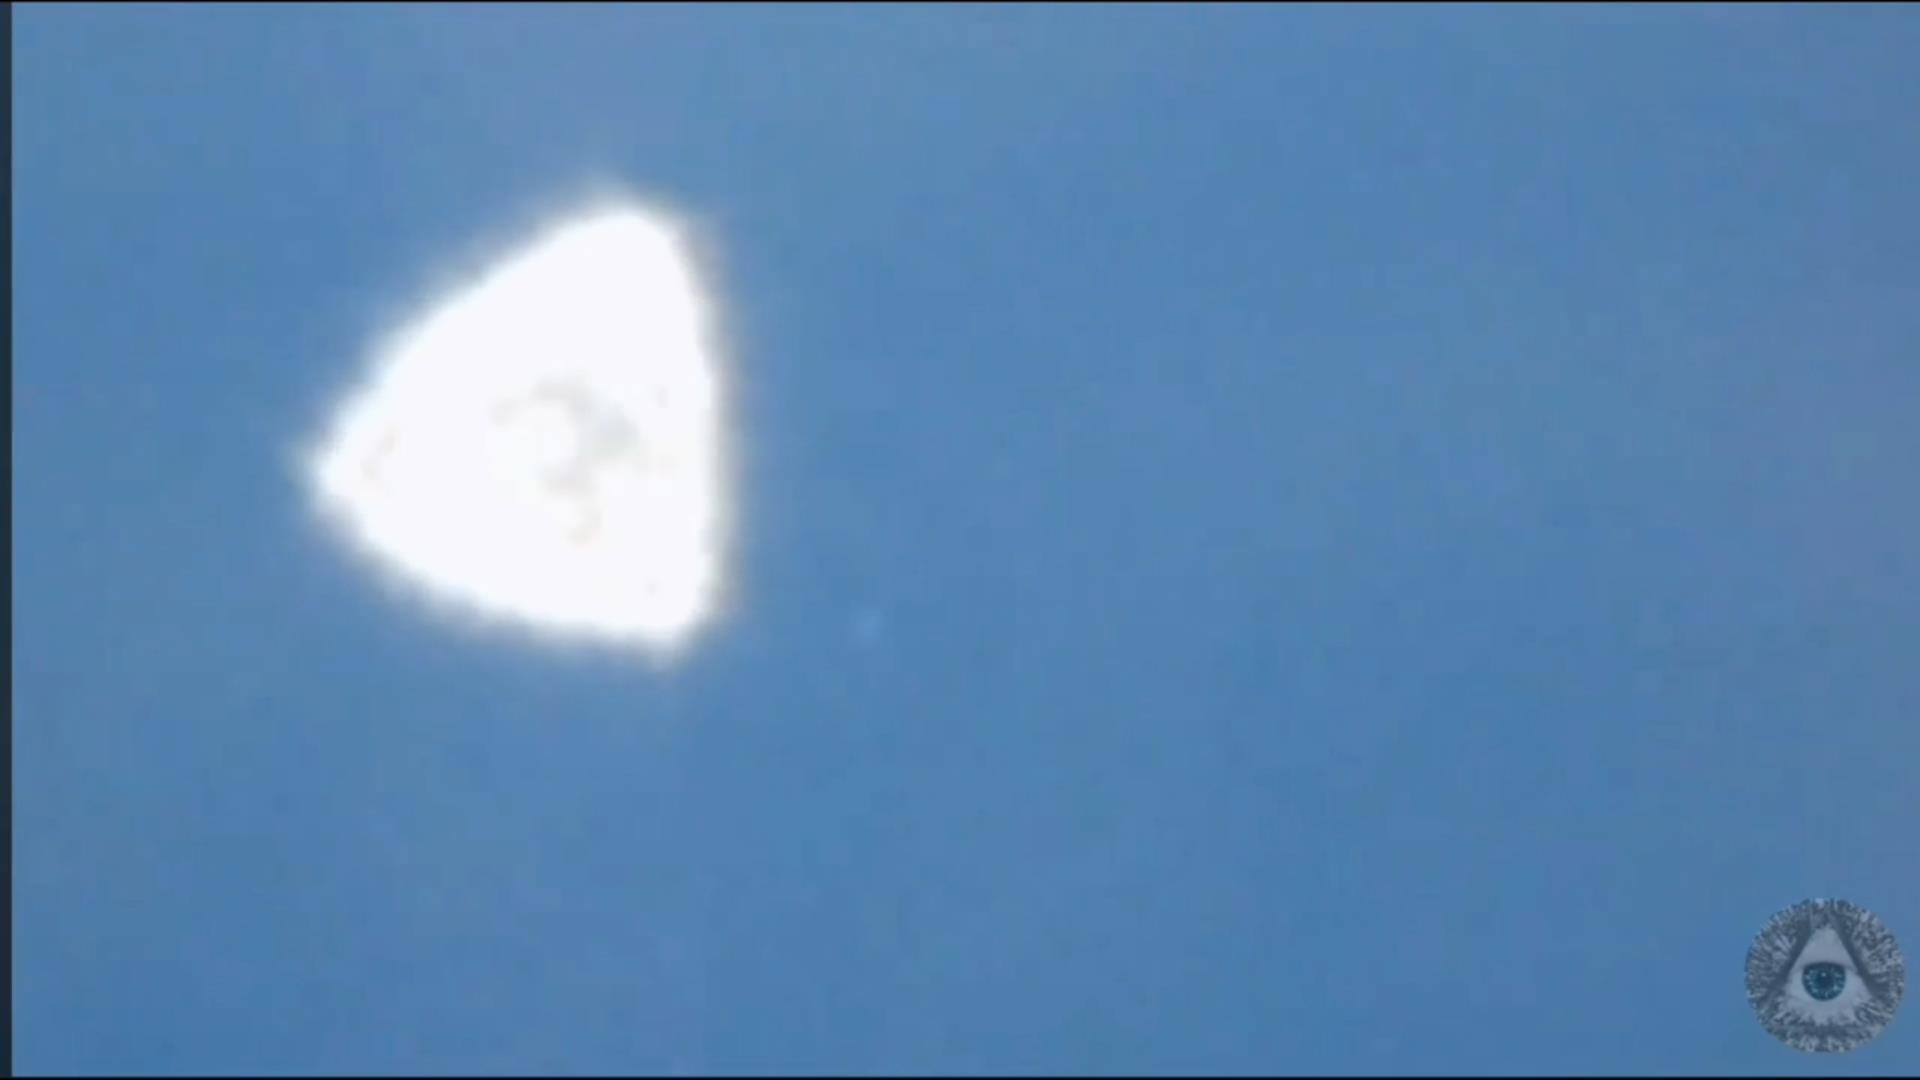 Image of the UFO zoomed in, showing its roughly triangular shape